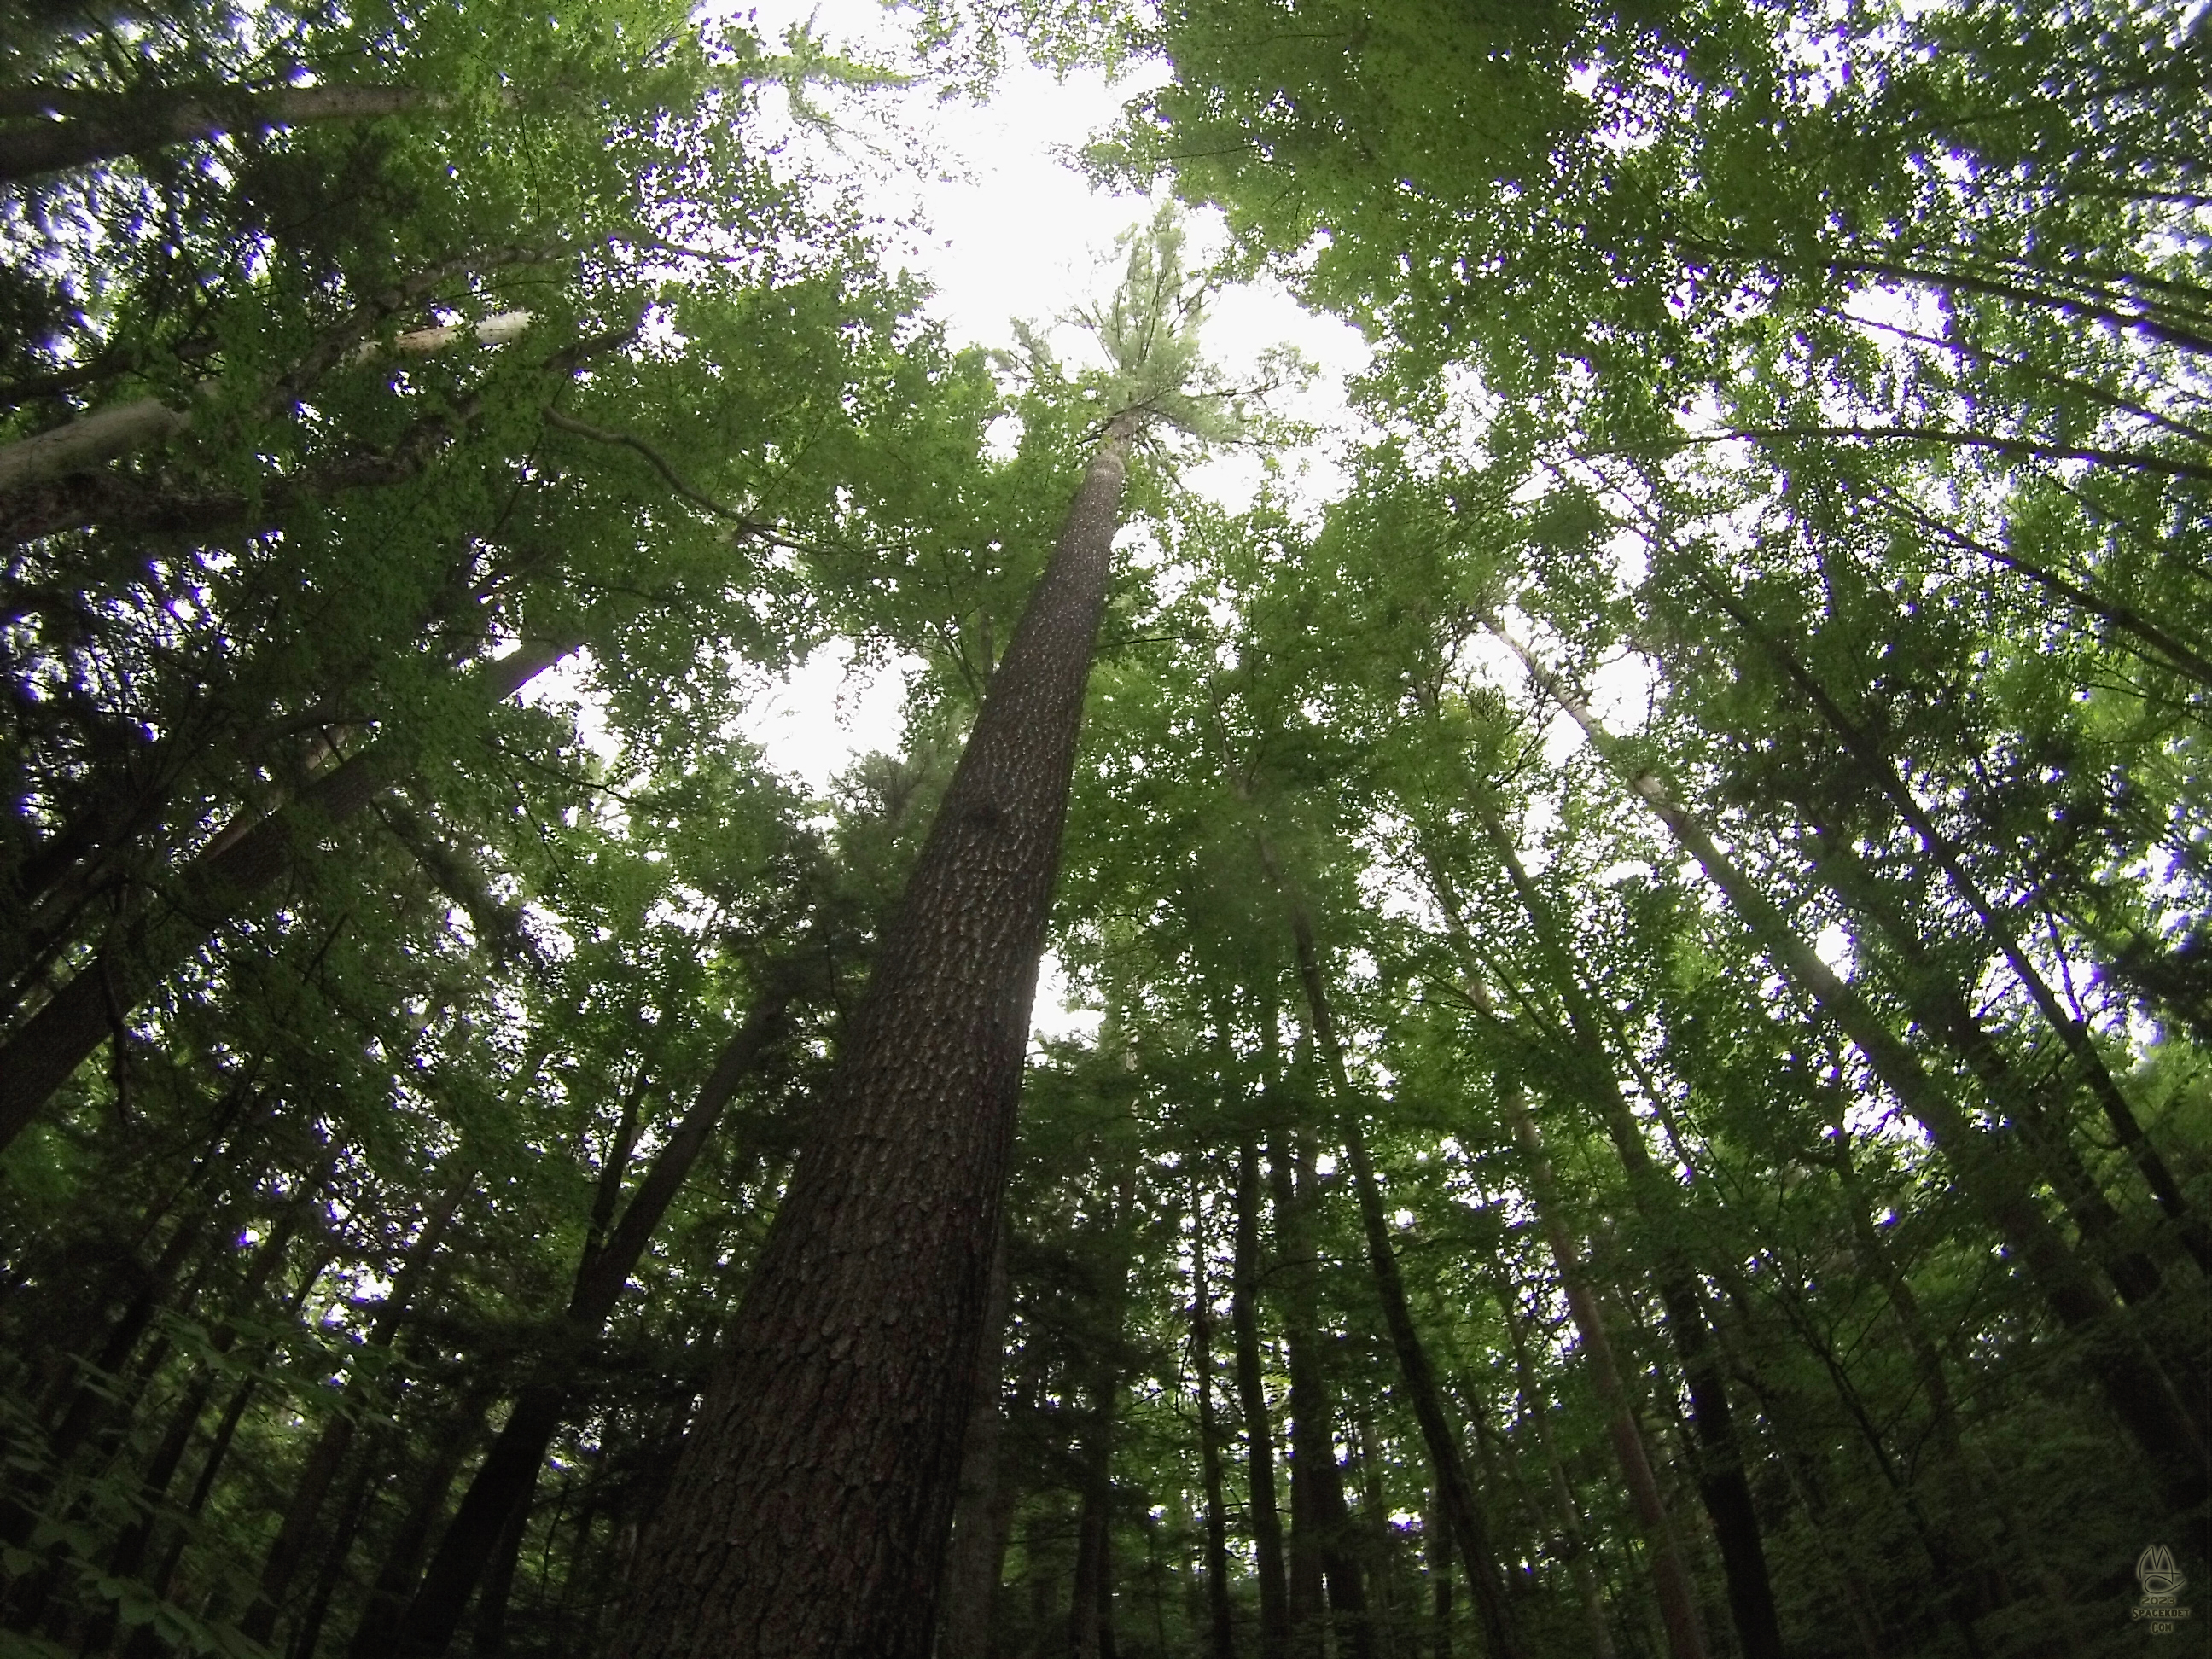 Back in the Cathedral. Hartwick Pines State Park. GoPro photo from 2014.